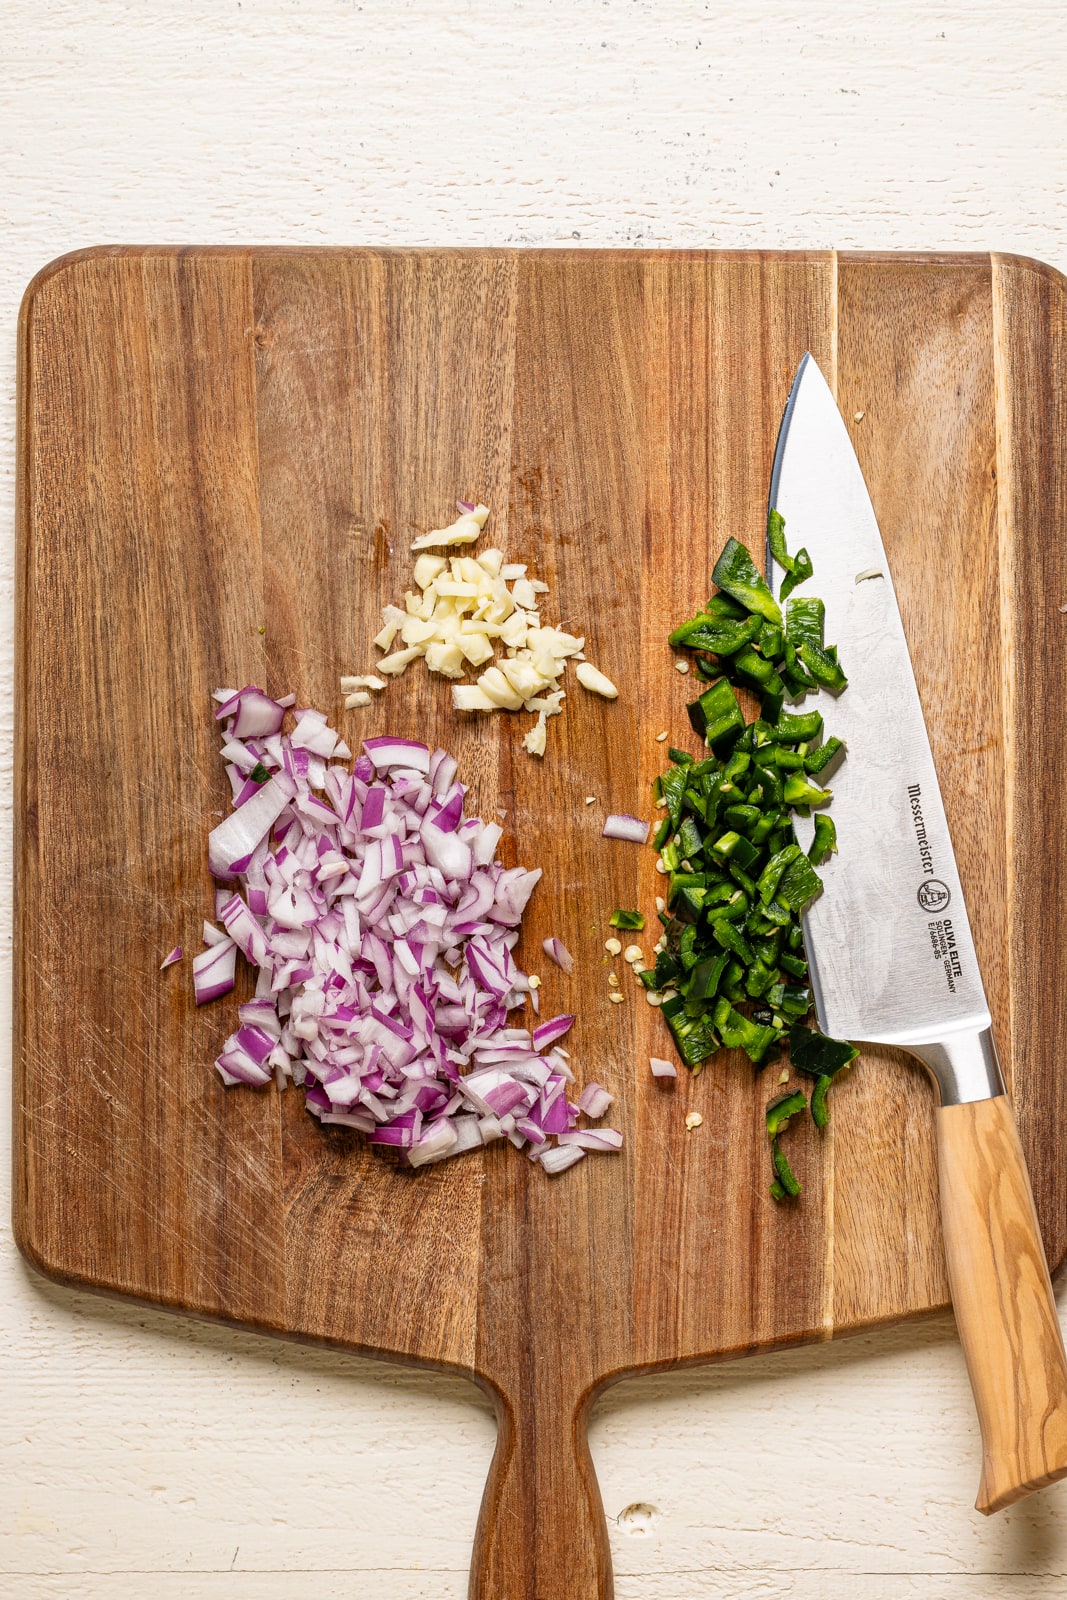 Chopped onions, garlic, and green onions on a cutting board with a knife.